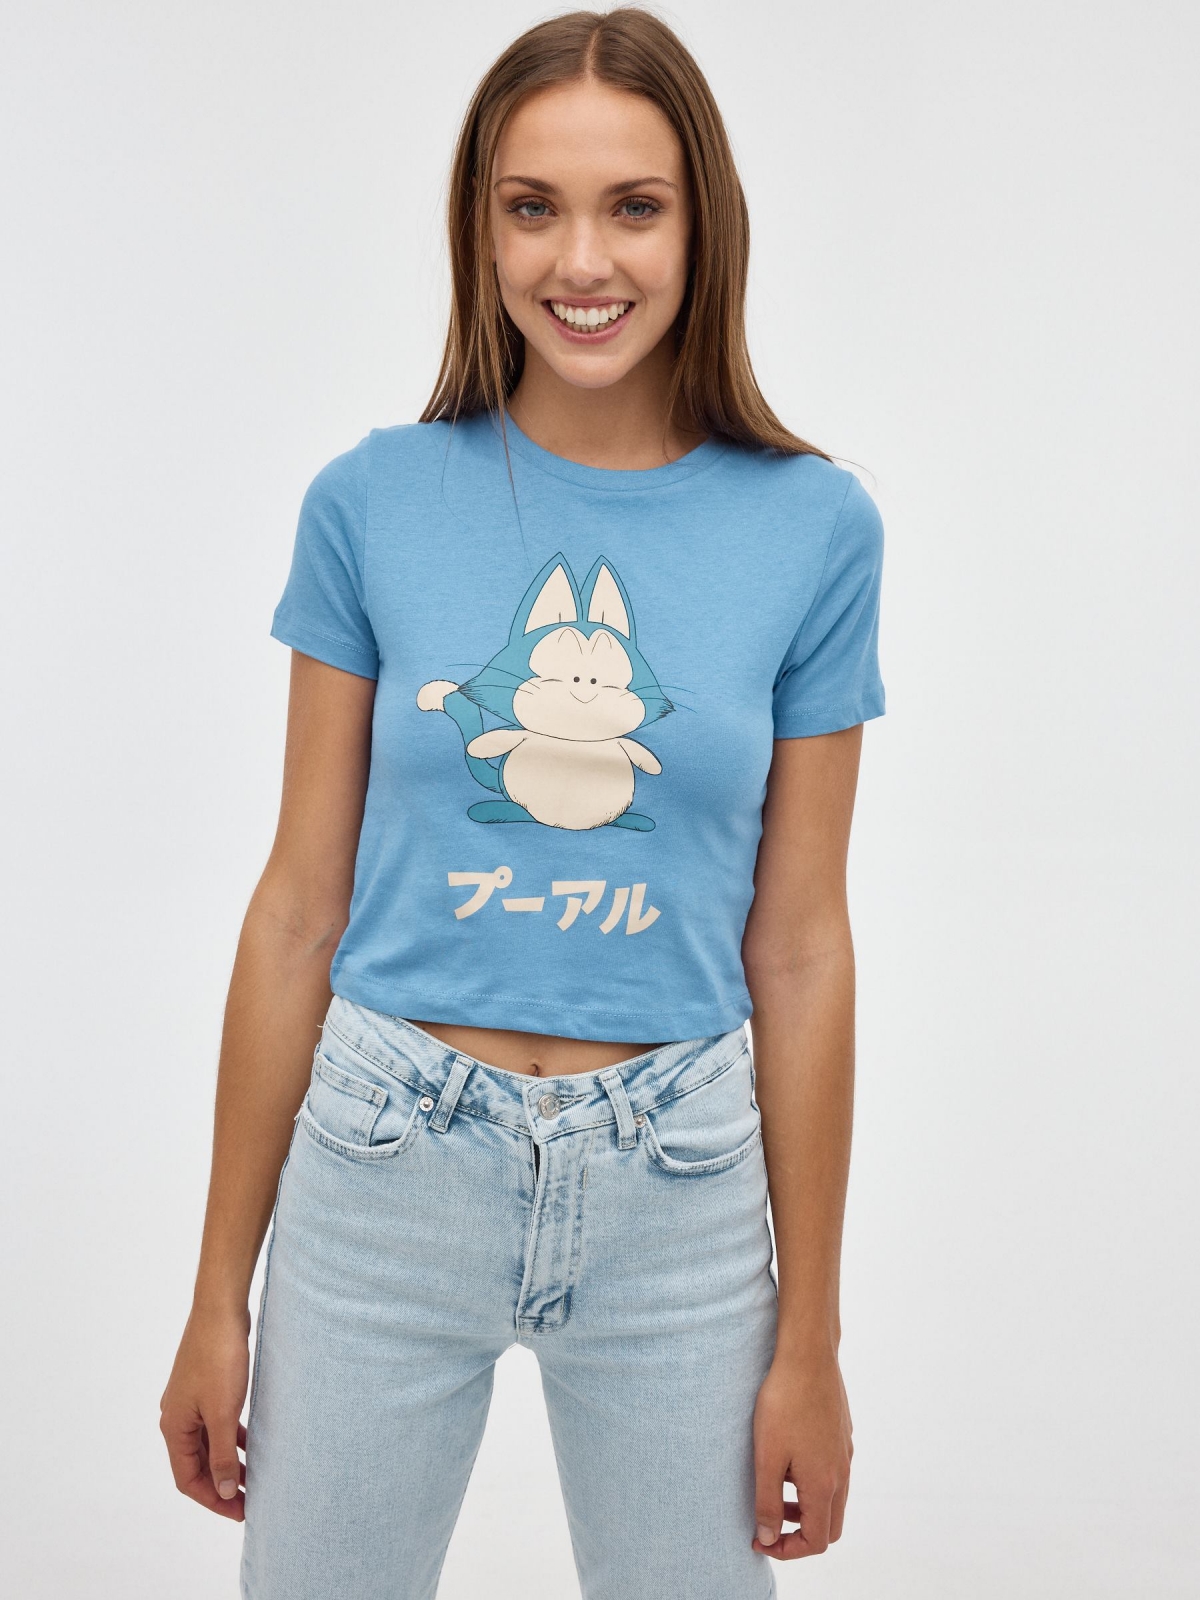 Pu'er Dragon Ball T-shirt steel blue middle front view